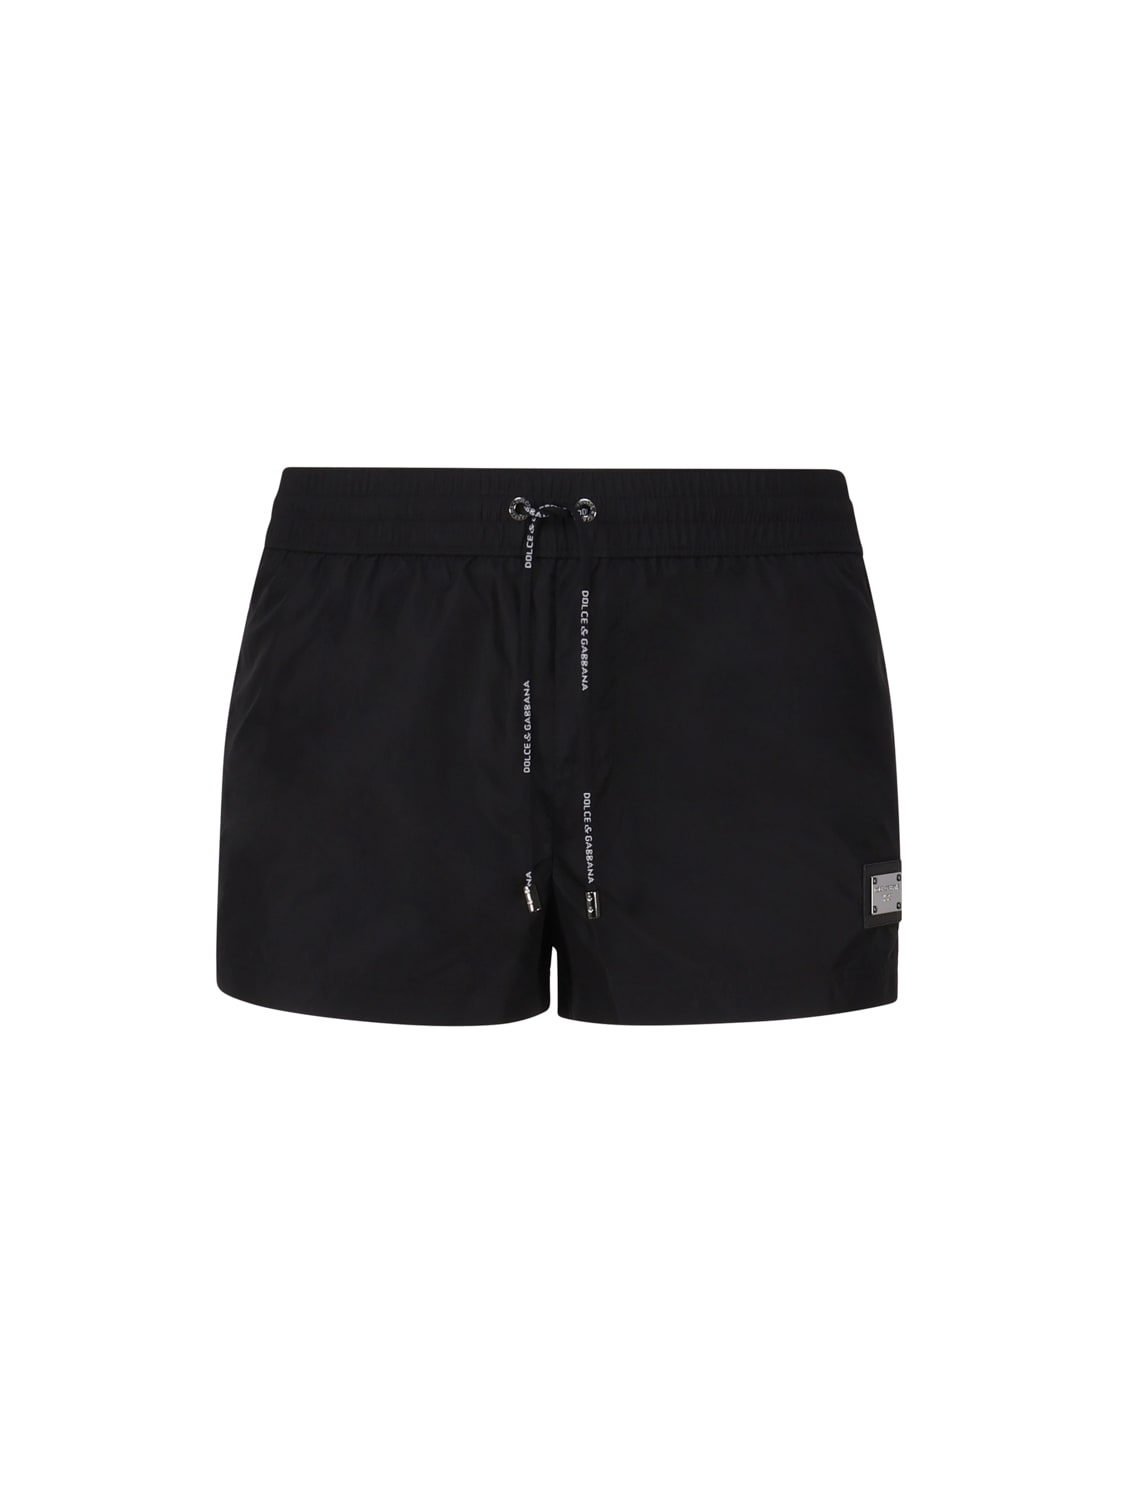 Shop Dolce & Gabbana Short Beach Boxer Shorts Made Of Lightweight Nylon With Metal Logo Plaque In Black